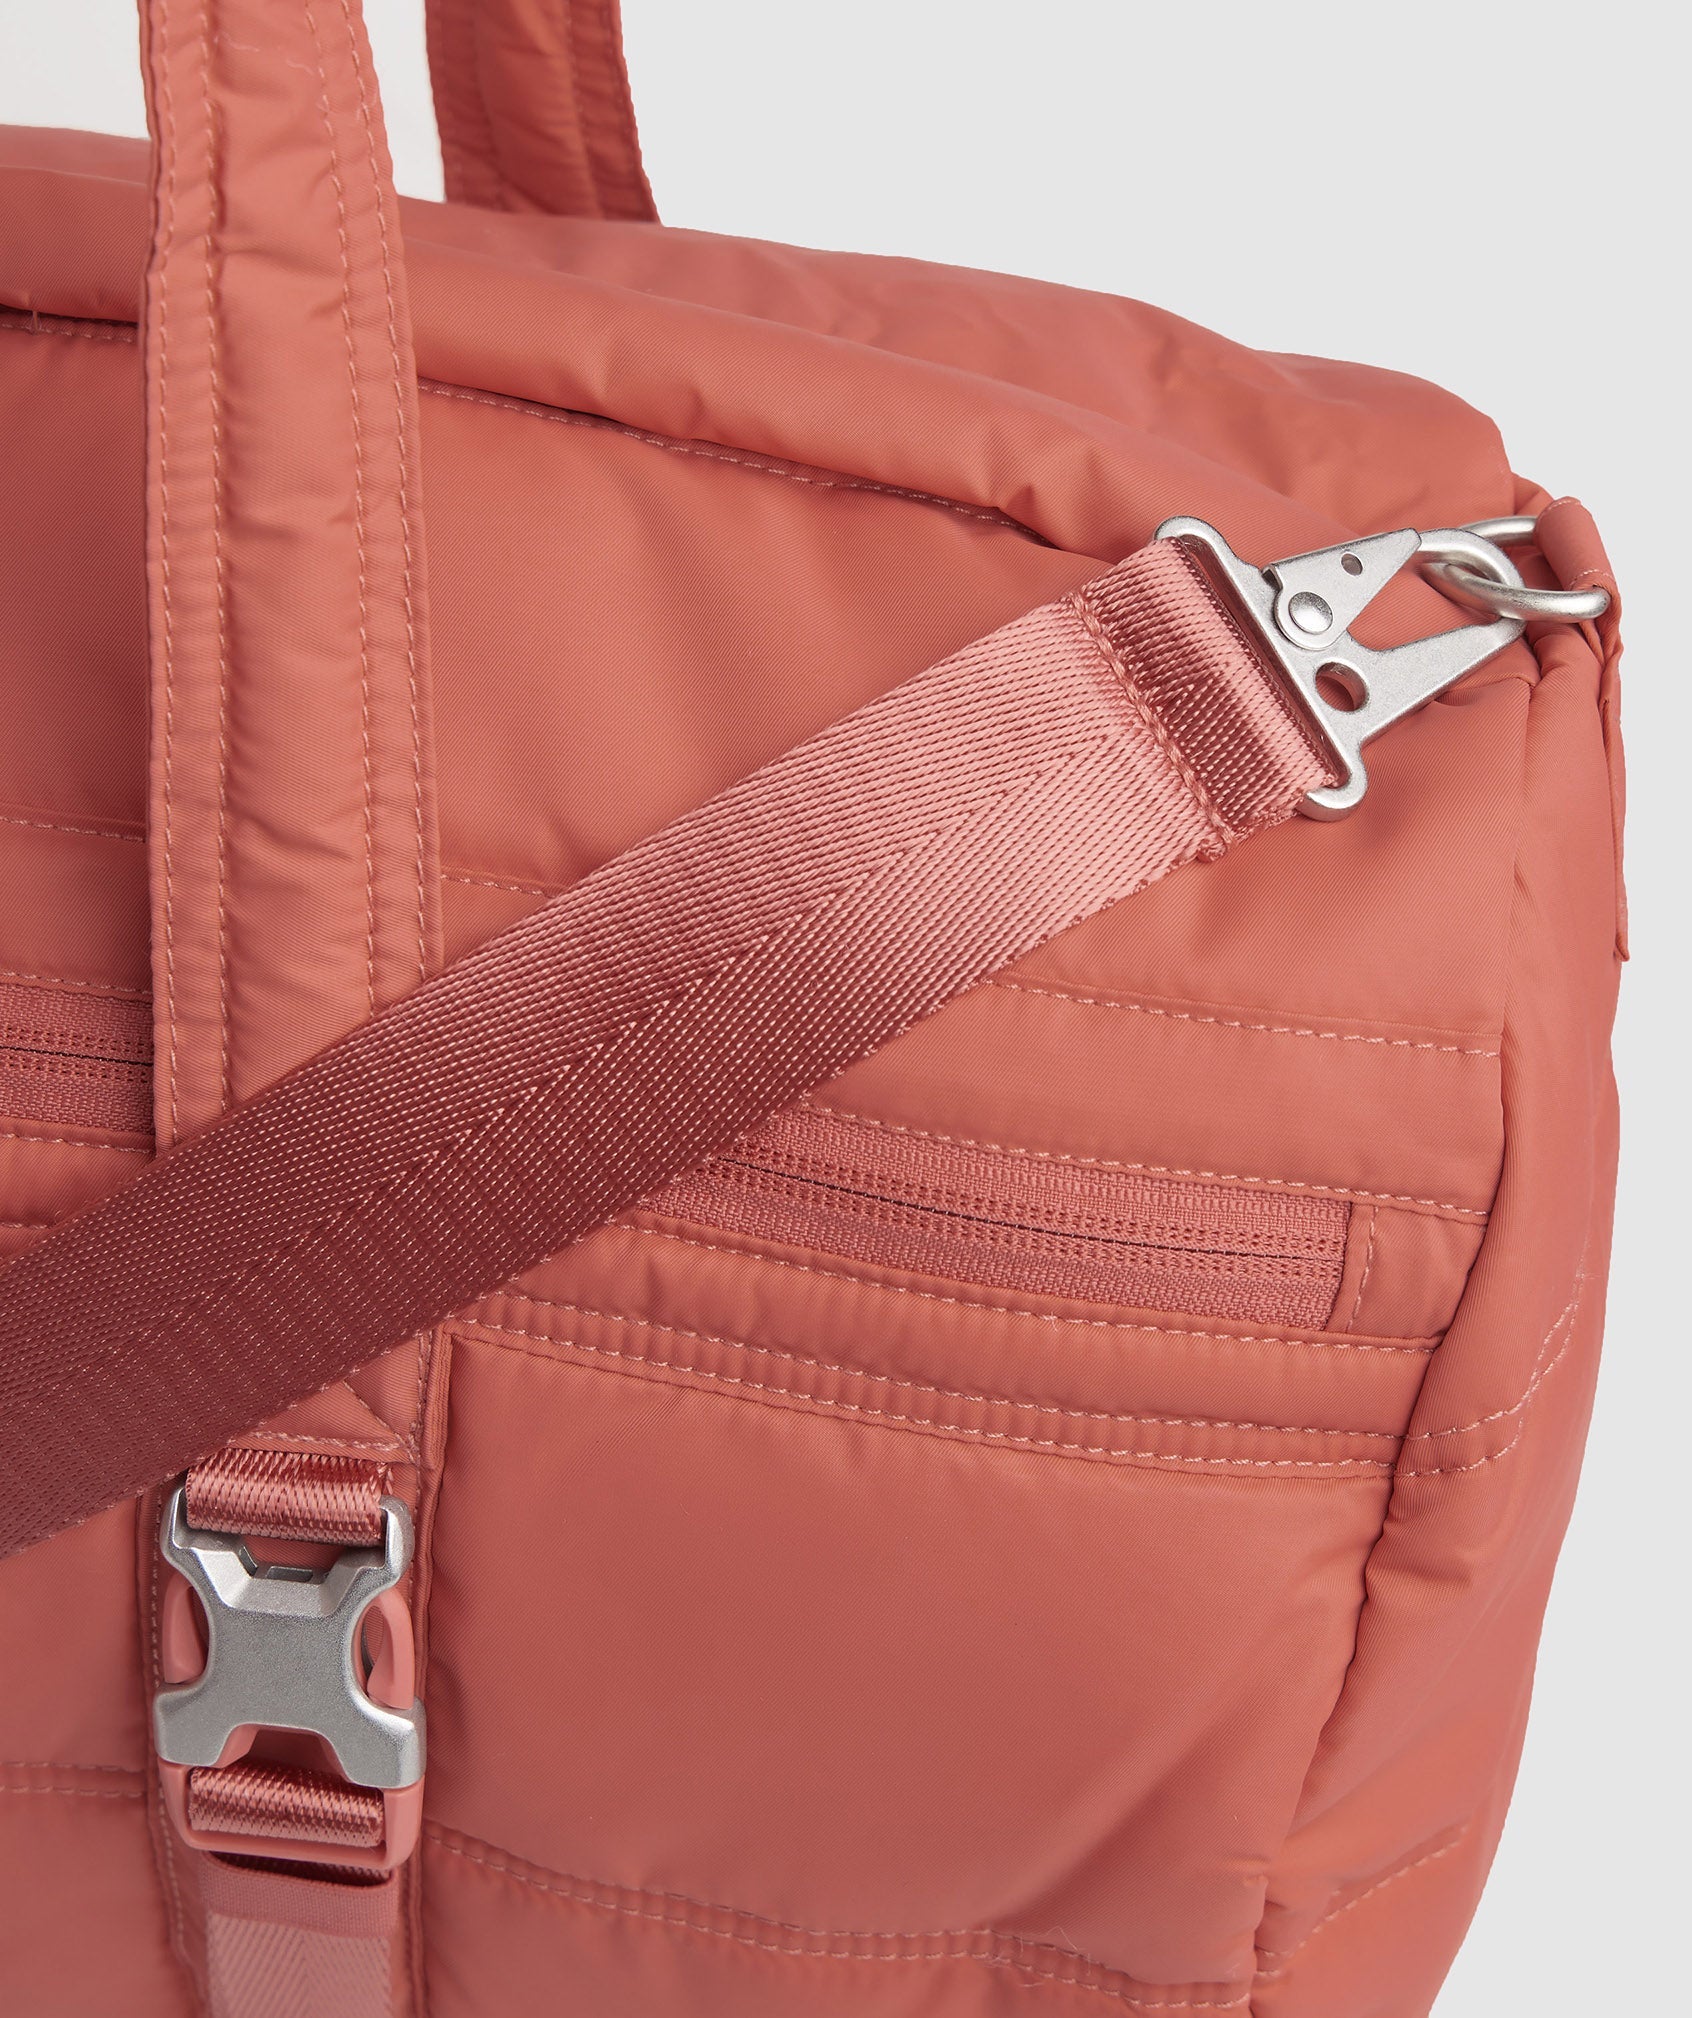 Lifestyle Barrel Bag in Terracotta Pink - view 5